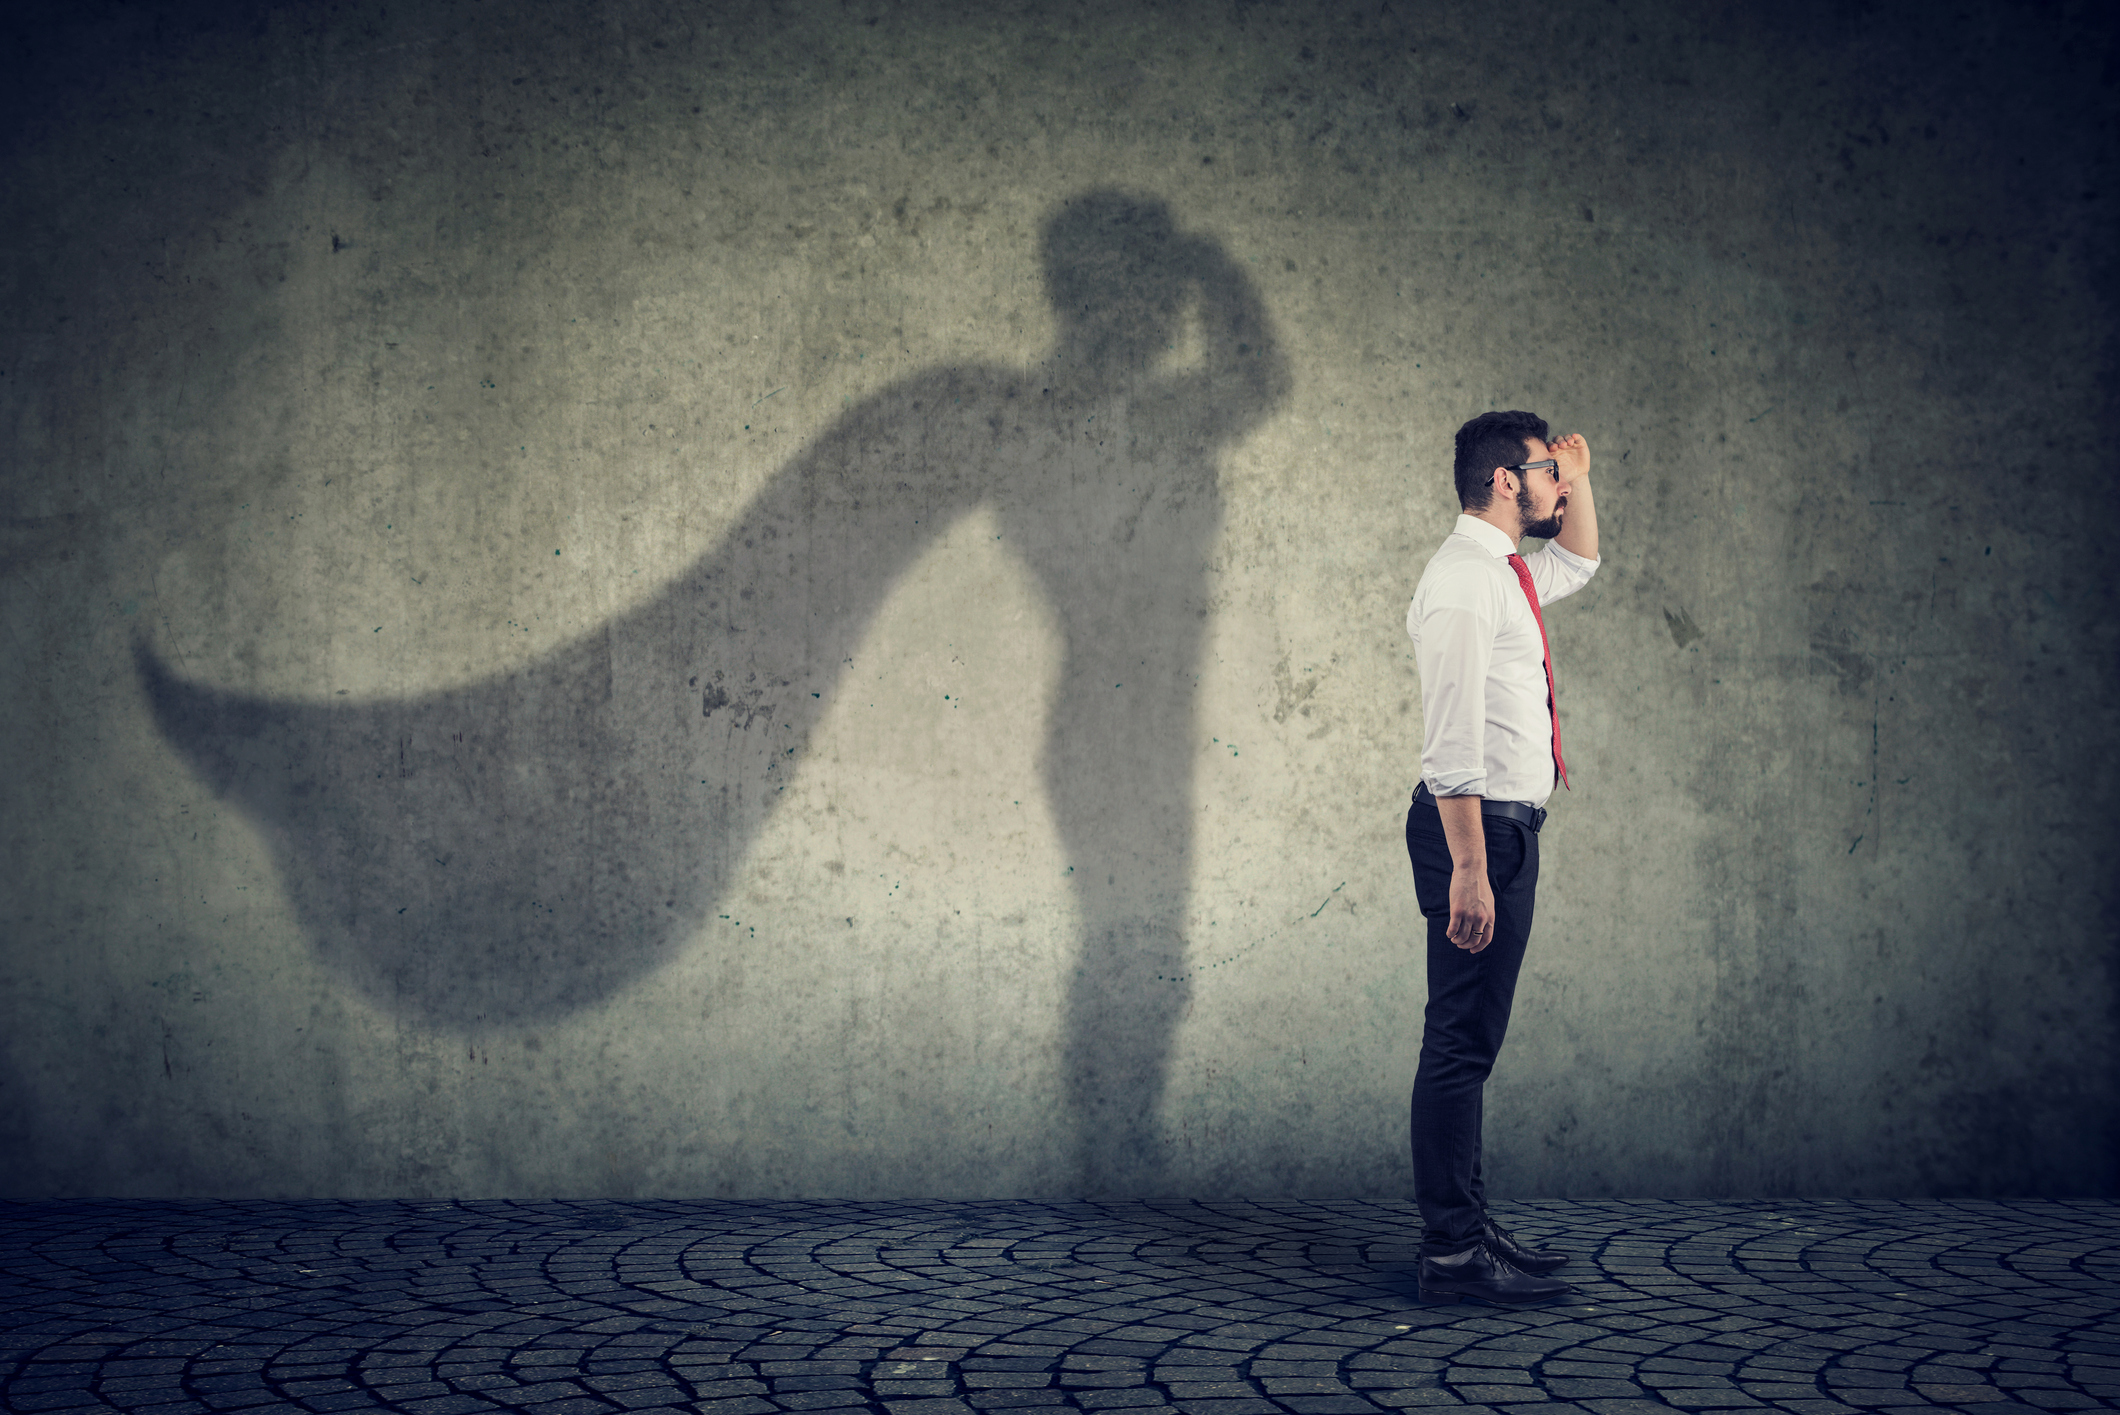 5 Tips to Quiet the Impulse to Lead “Heroically”